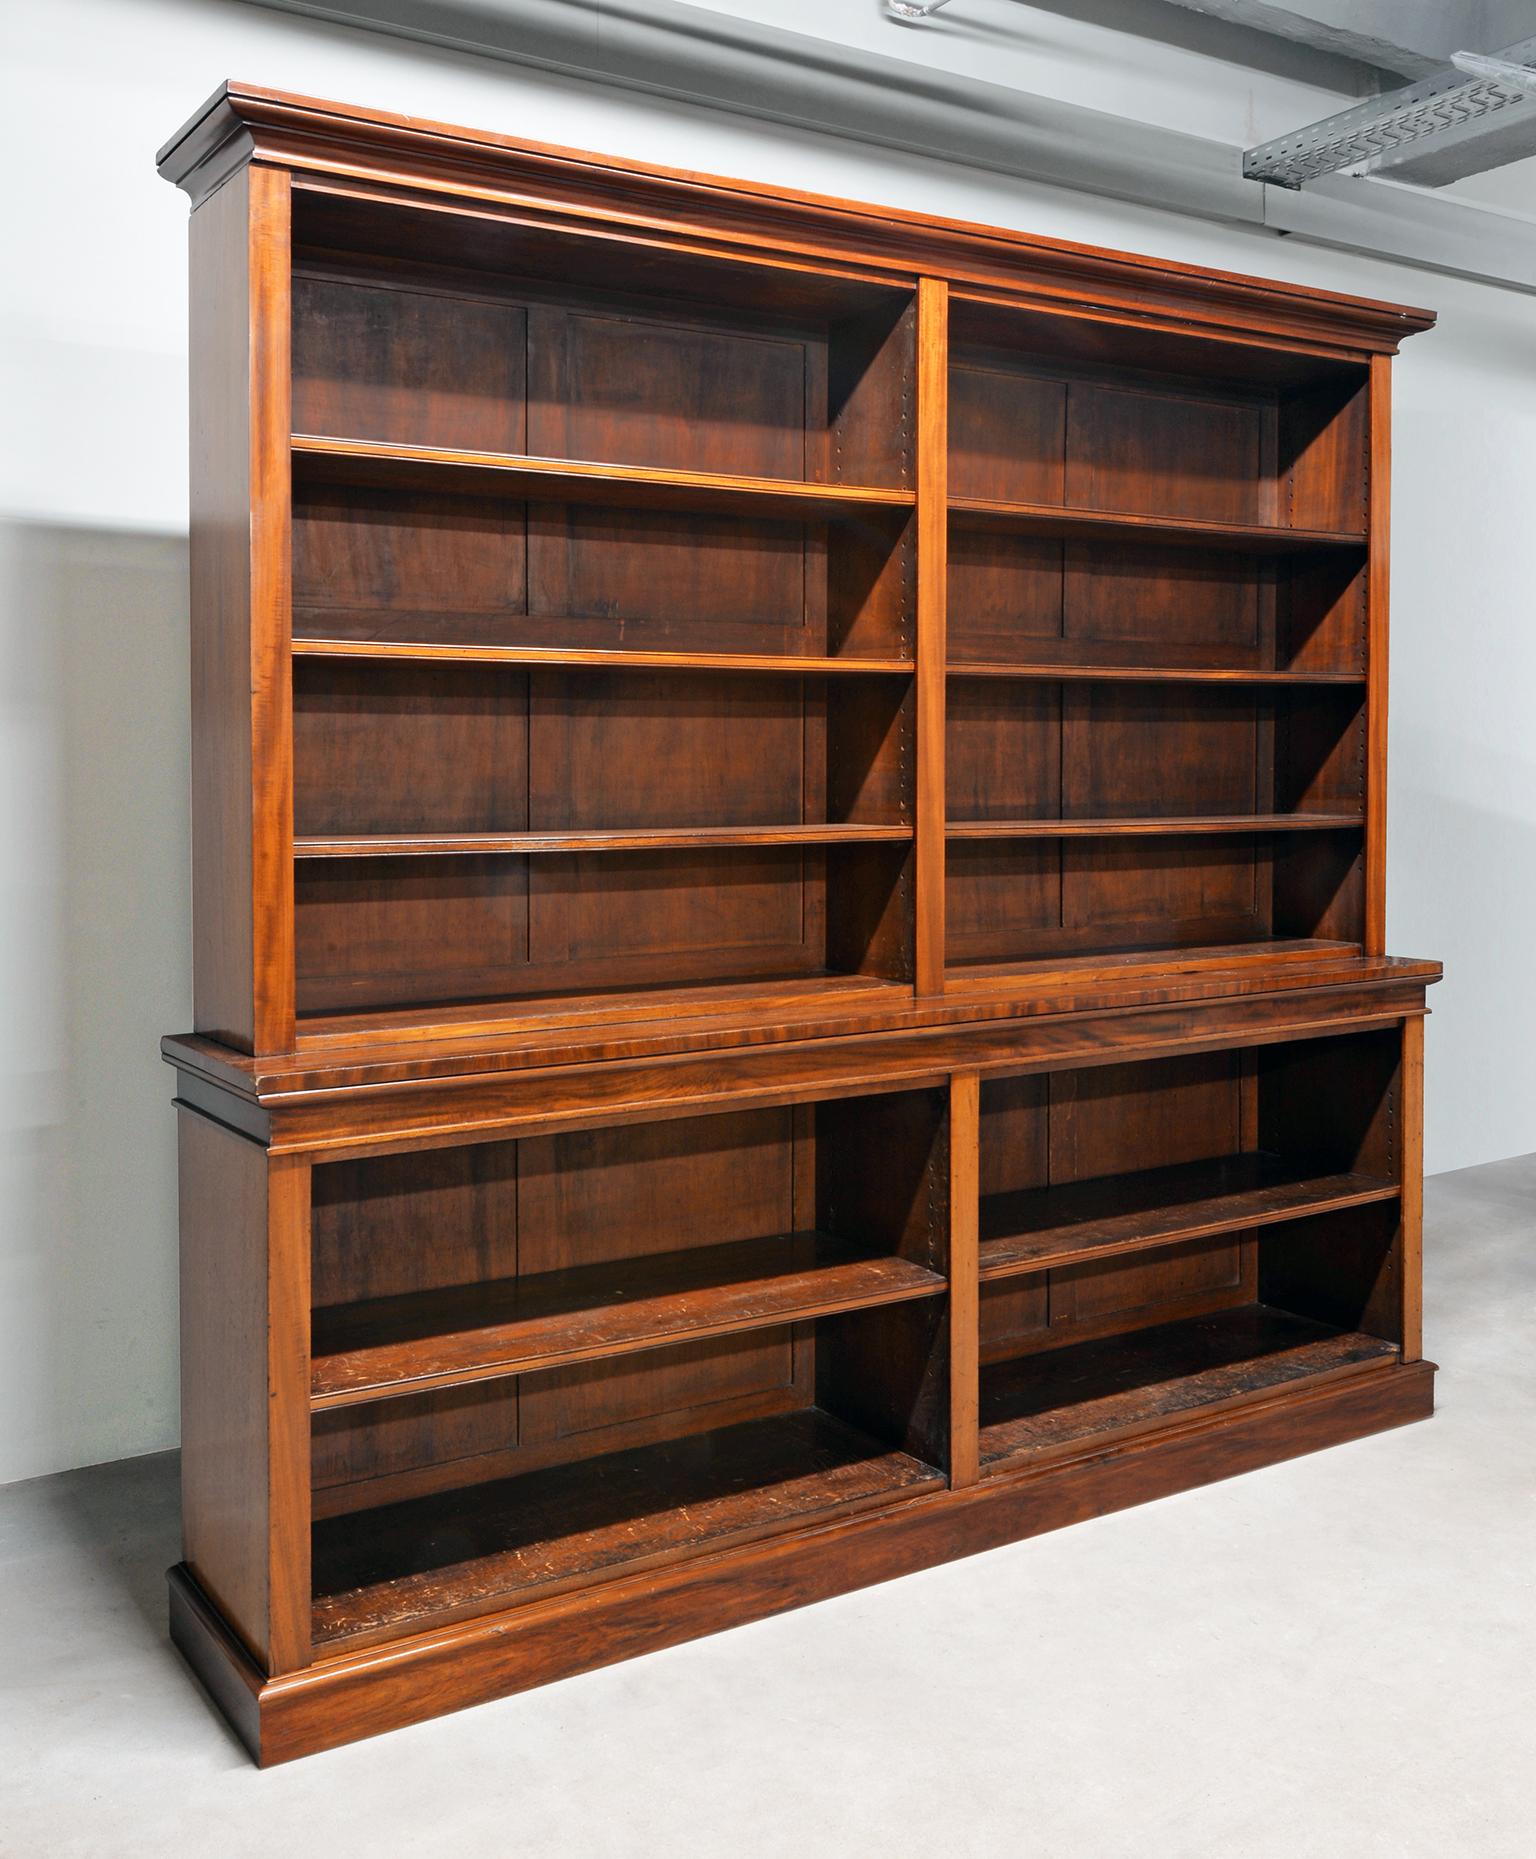 Large victorian breakfront open bookcase in four-parts, mahogany, c. 1860
The bookcase can be restored on request.

Lit.: R. W. Symonds and B. B. Whineray, Victorian Furniture, London 1987, p. 149-160.